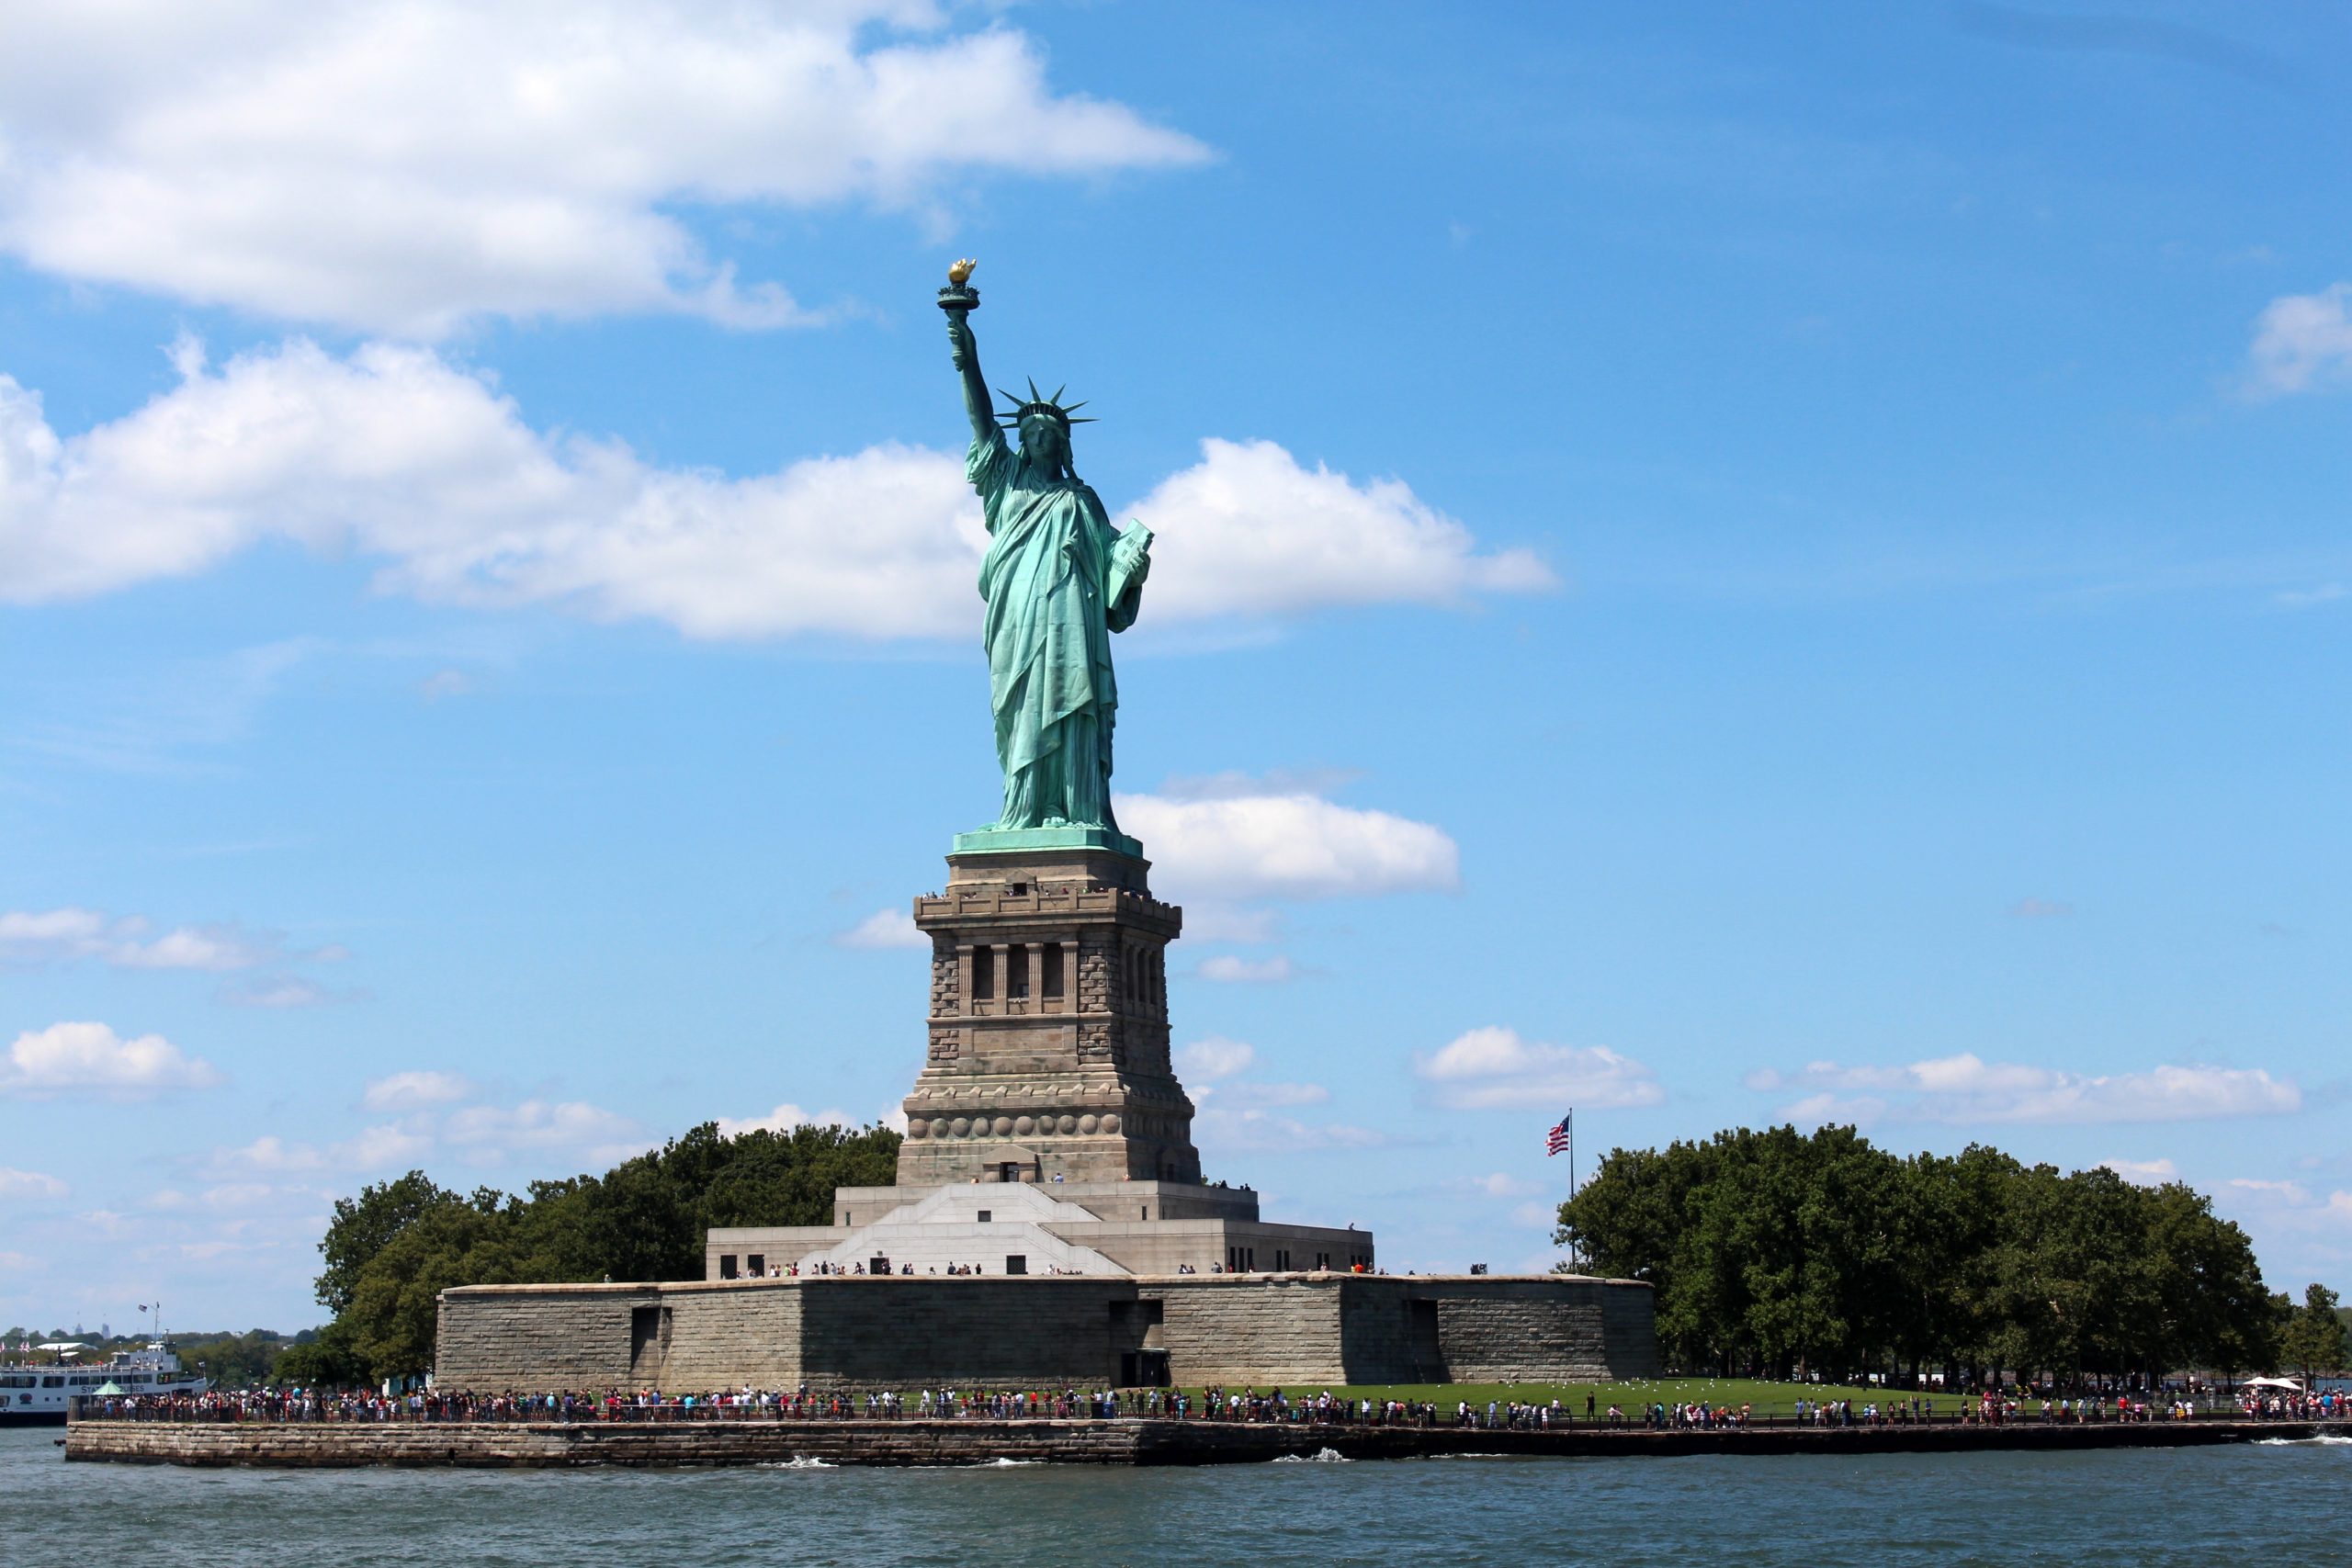 Sail to the Statue of Liberty